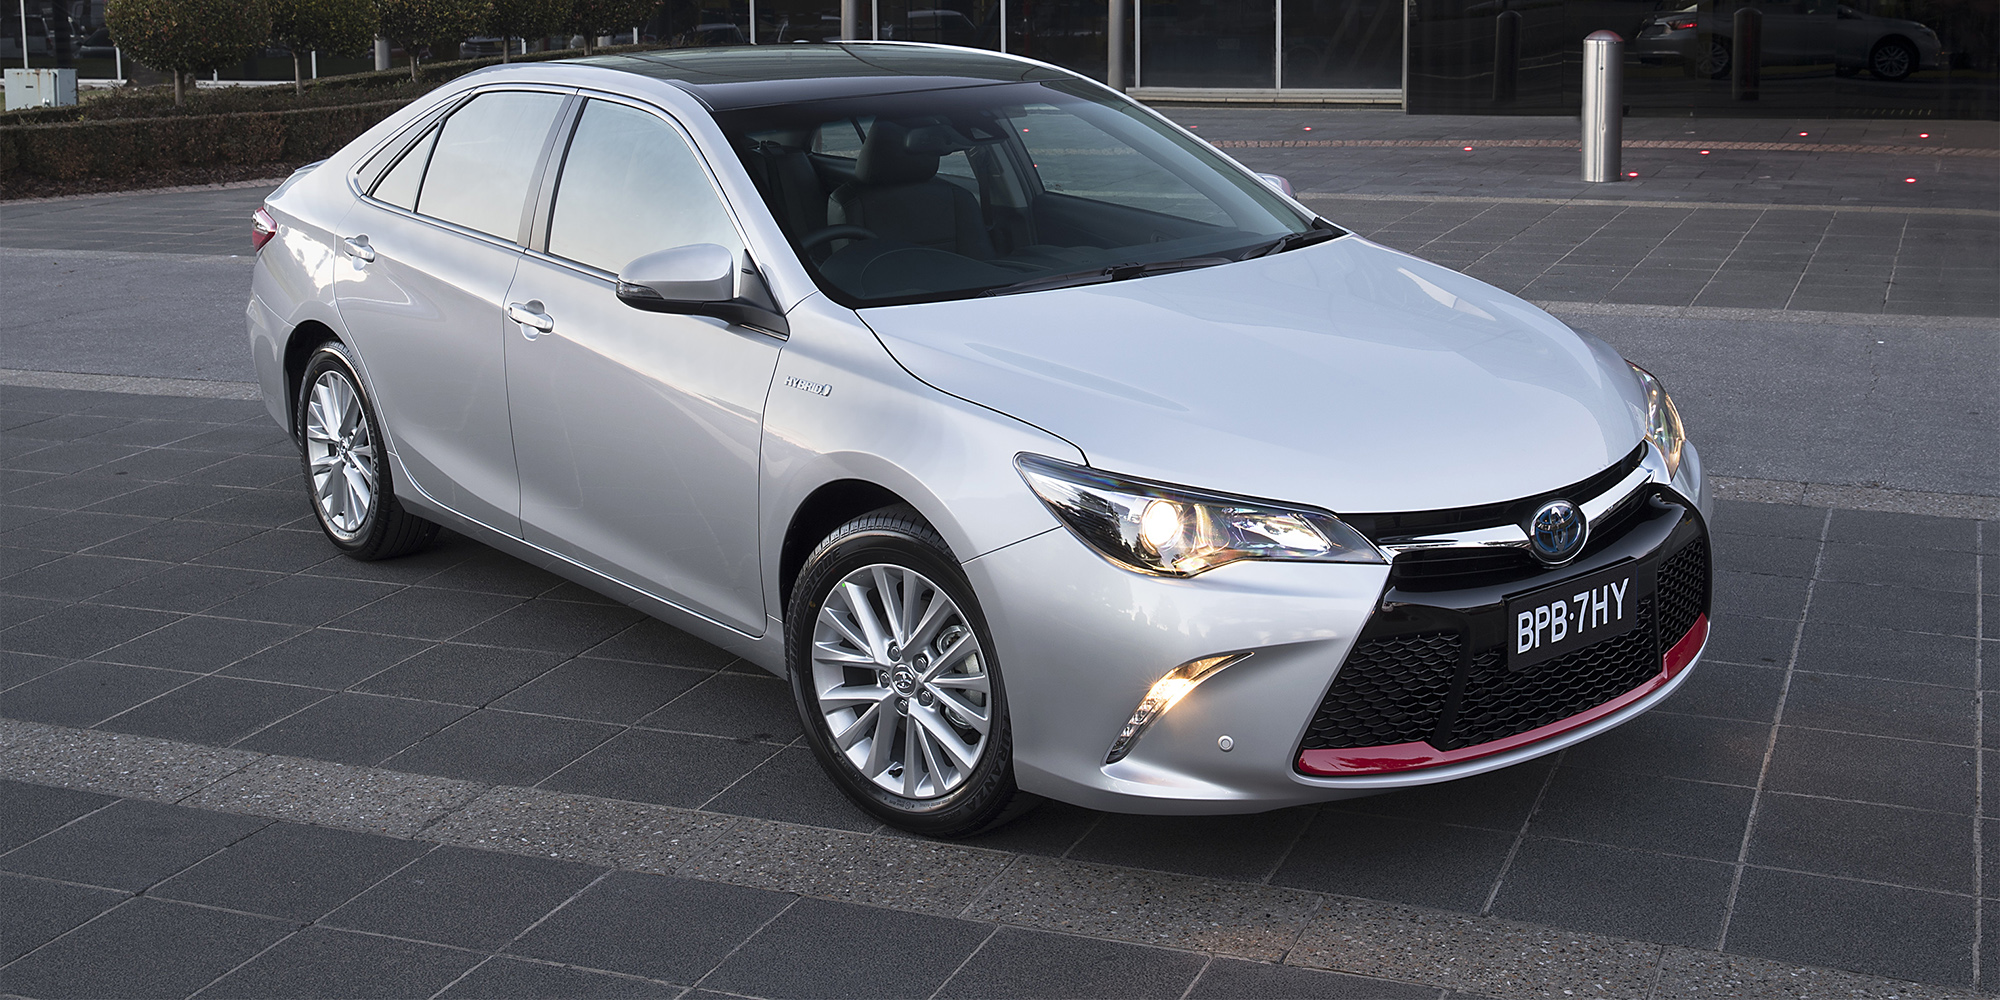 2017 Toyota Camry Commemorative Edition arrives from $41,150 photos
CarAdvice